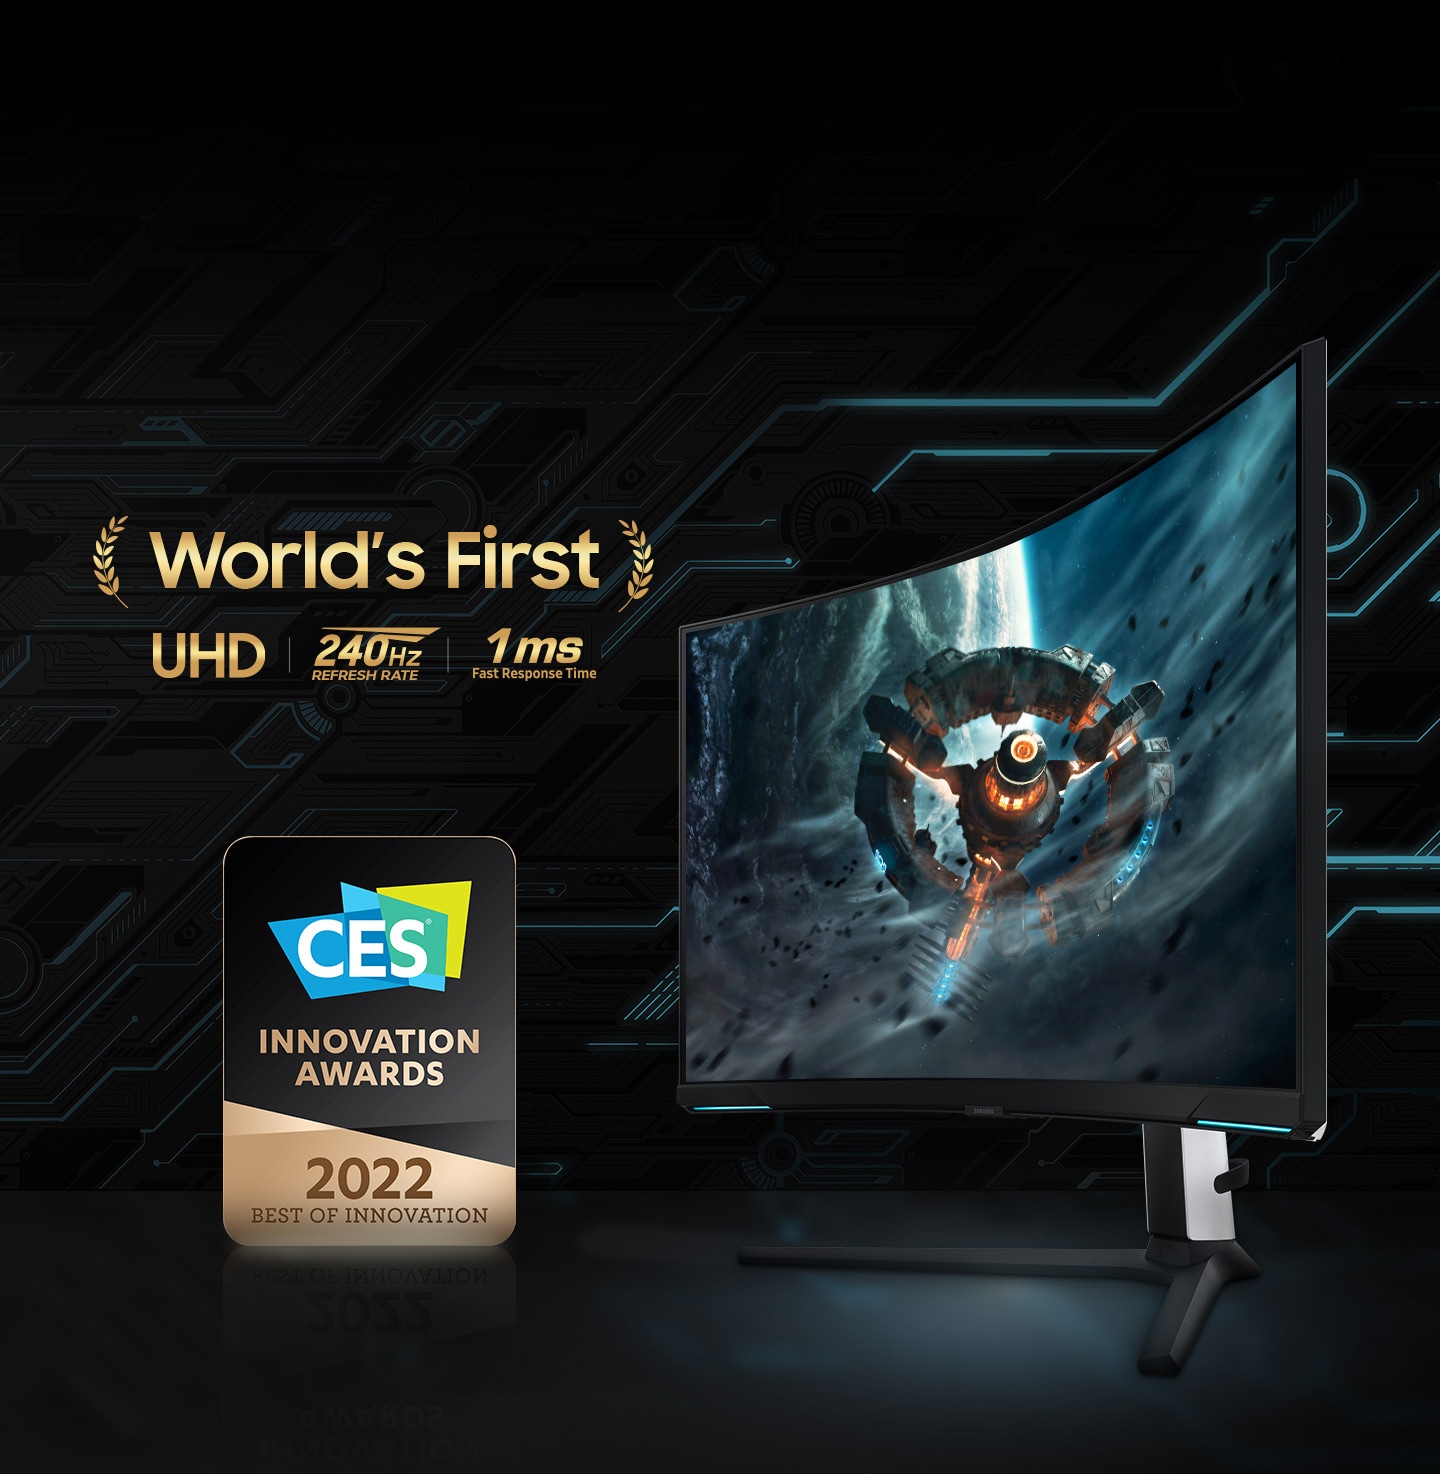 On the monitor display which is pivoted slightly to the left. Next to the monitor are the words ""World's first"", with included on the icons on UHD resolution, 240Hz refresh rate and 1ms fast response time. And a CES Innovation Awards 2022 Best of Innovation logo.